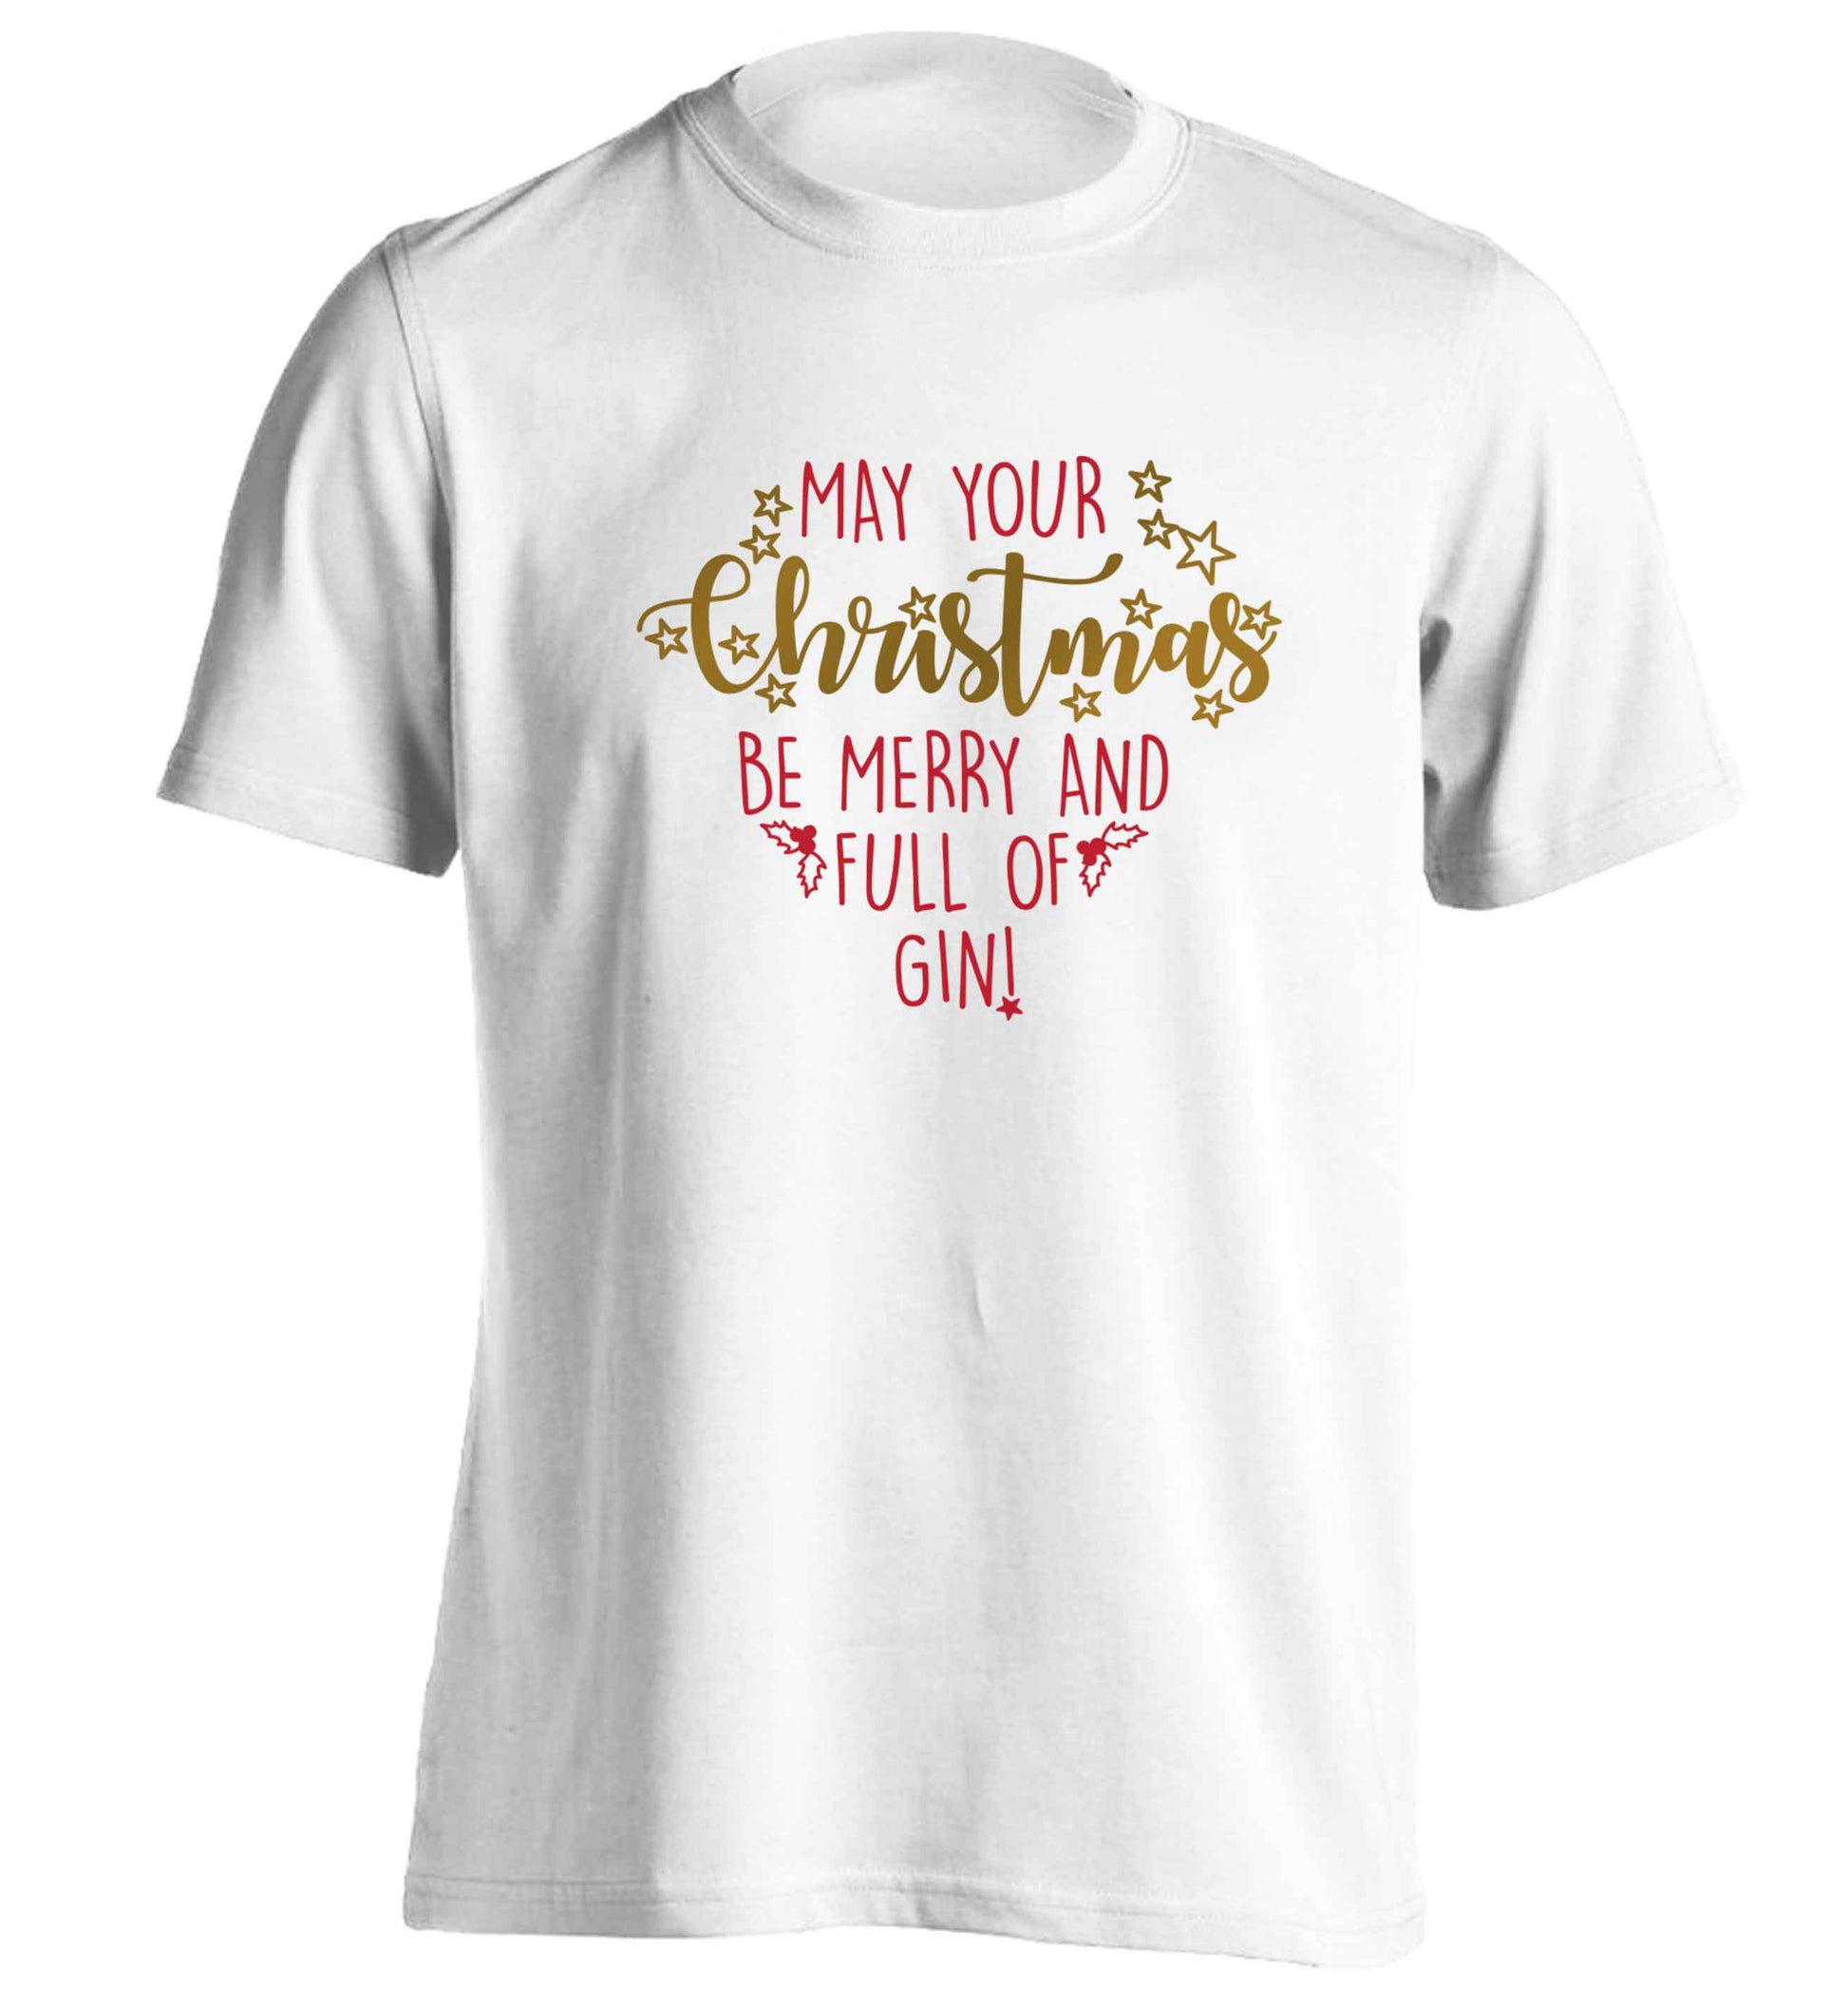 May your Christmas be merry and full of gin adults unisex white Tshirt 2XL